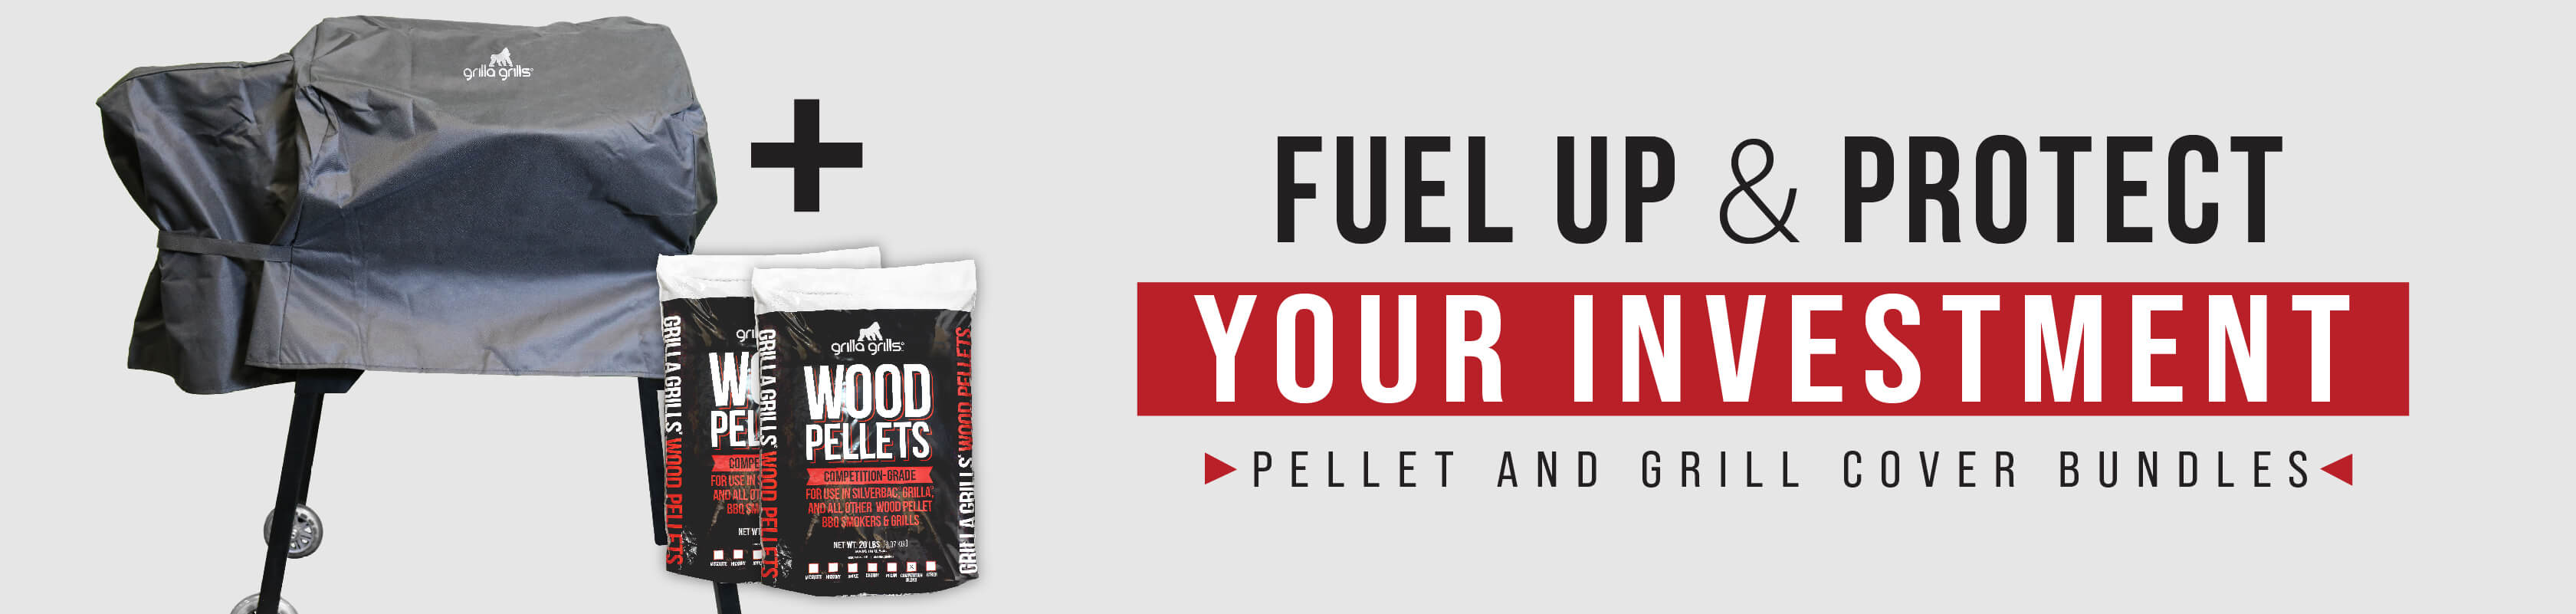 Fuel up and protect your investment (pellet and grill cover bundles)